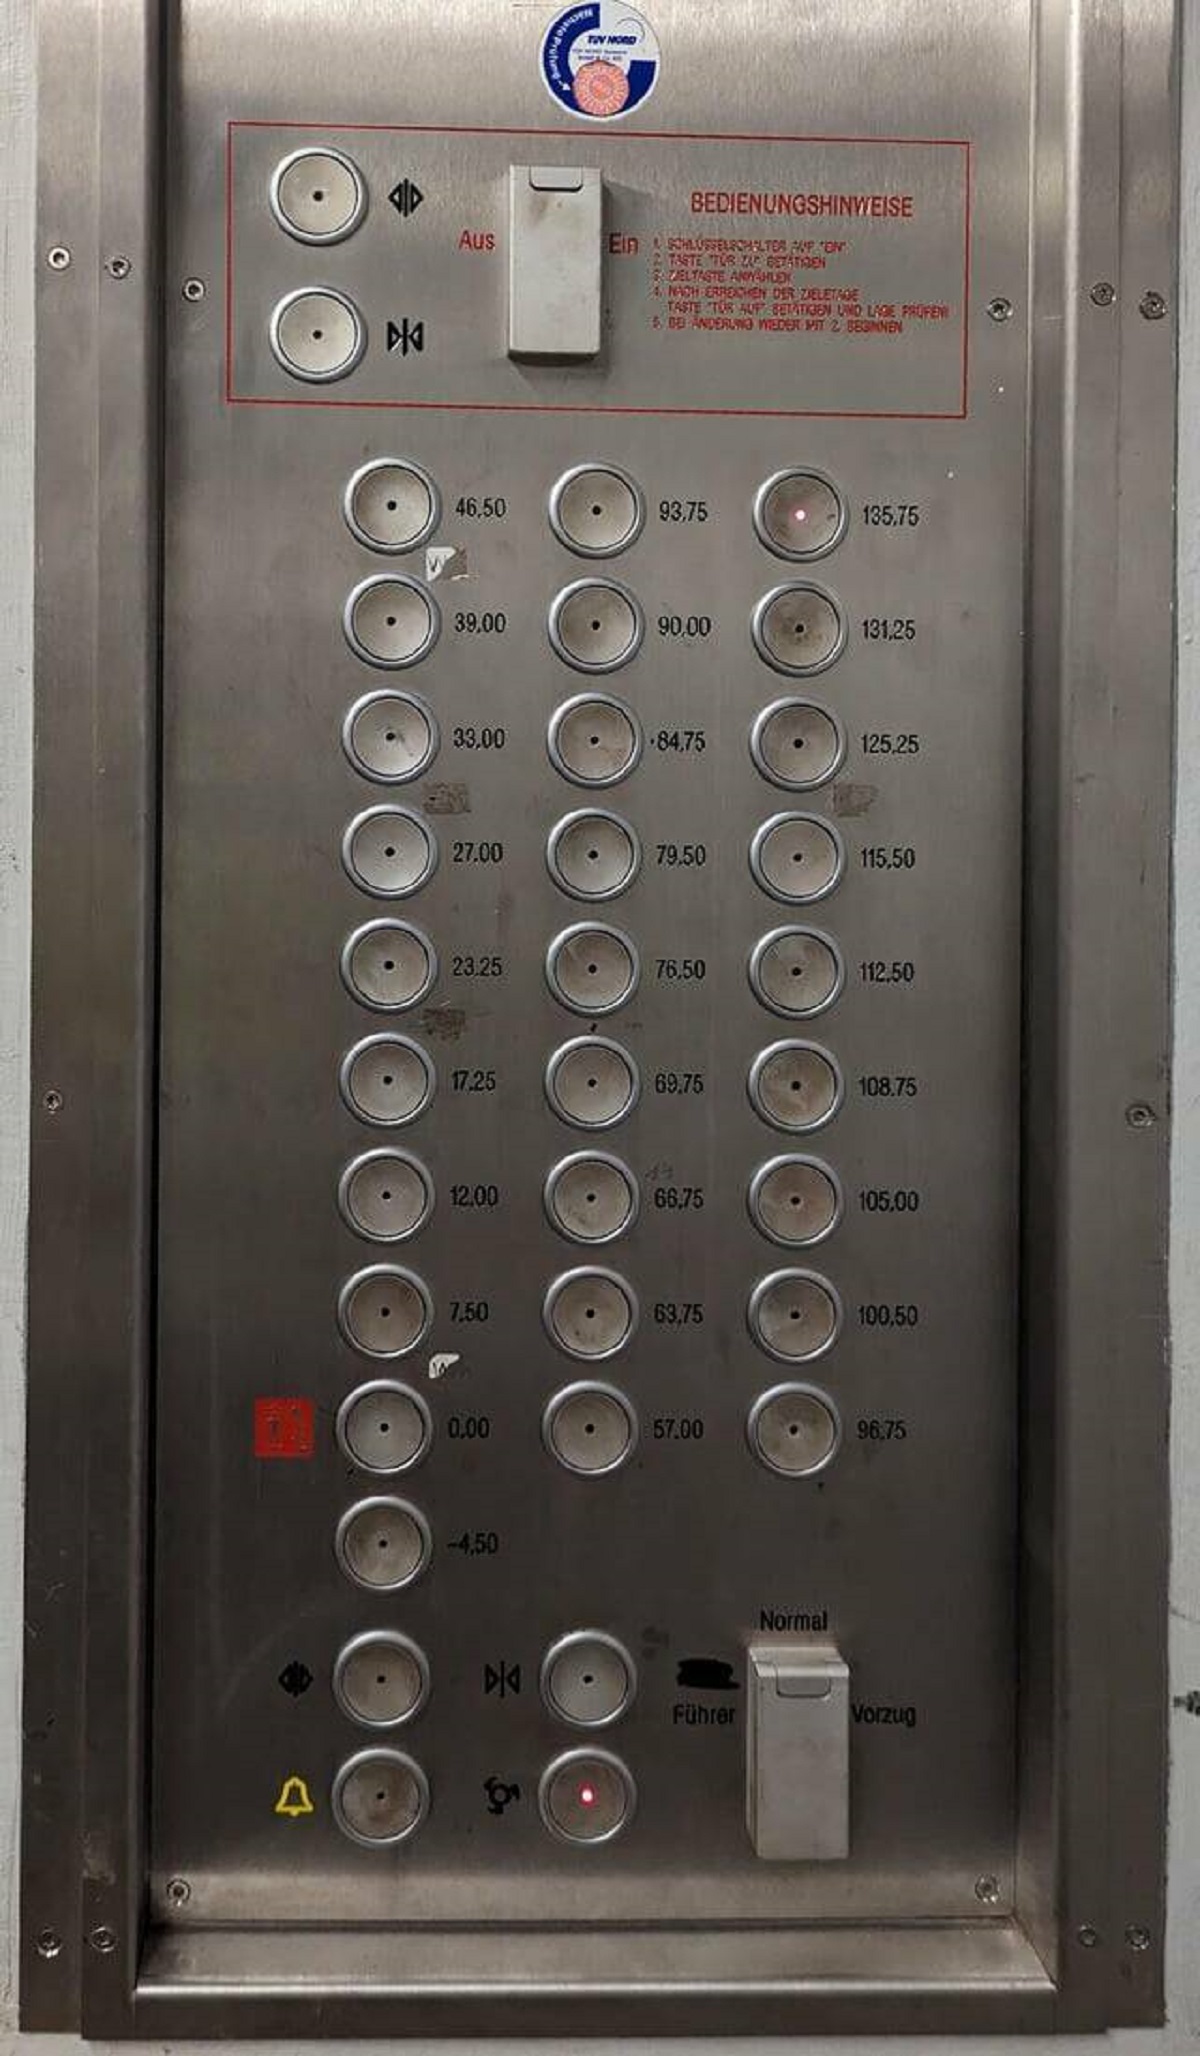 "This German elevator has floors marked by height instead of numbered"